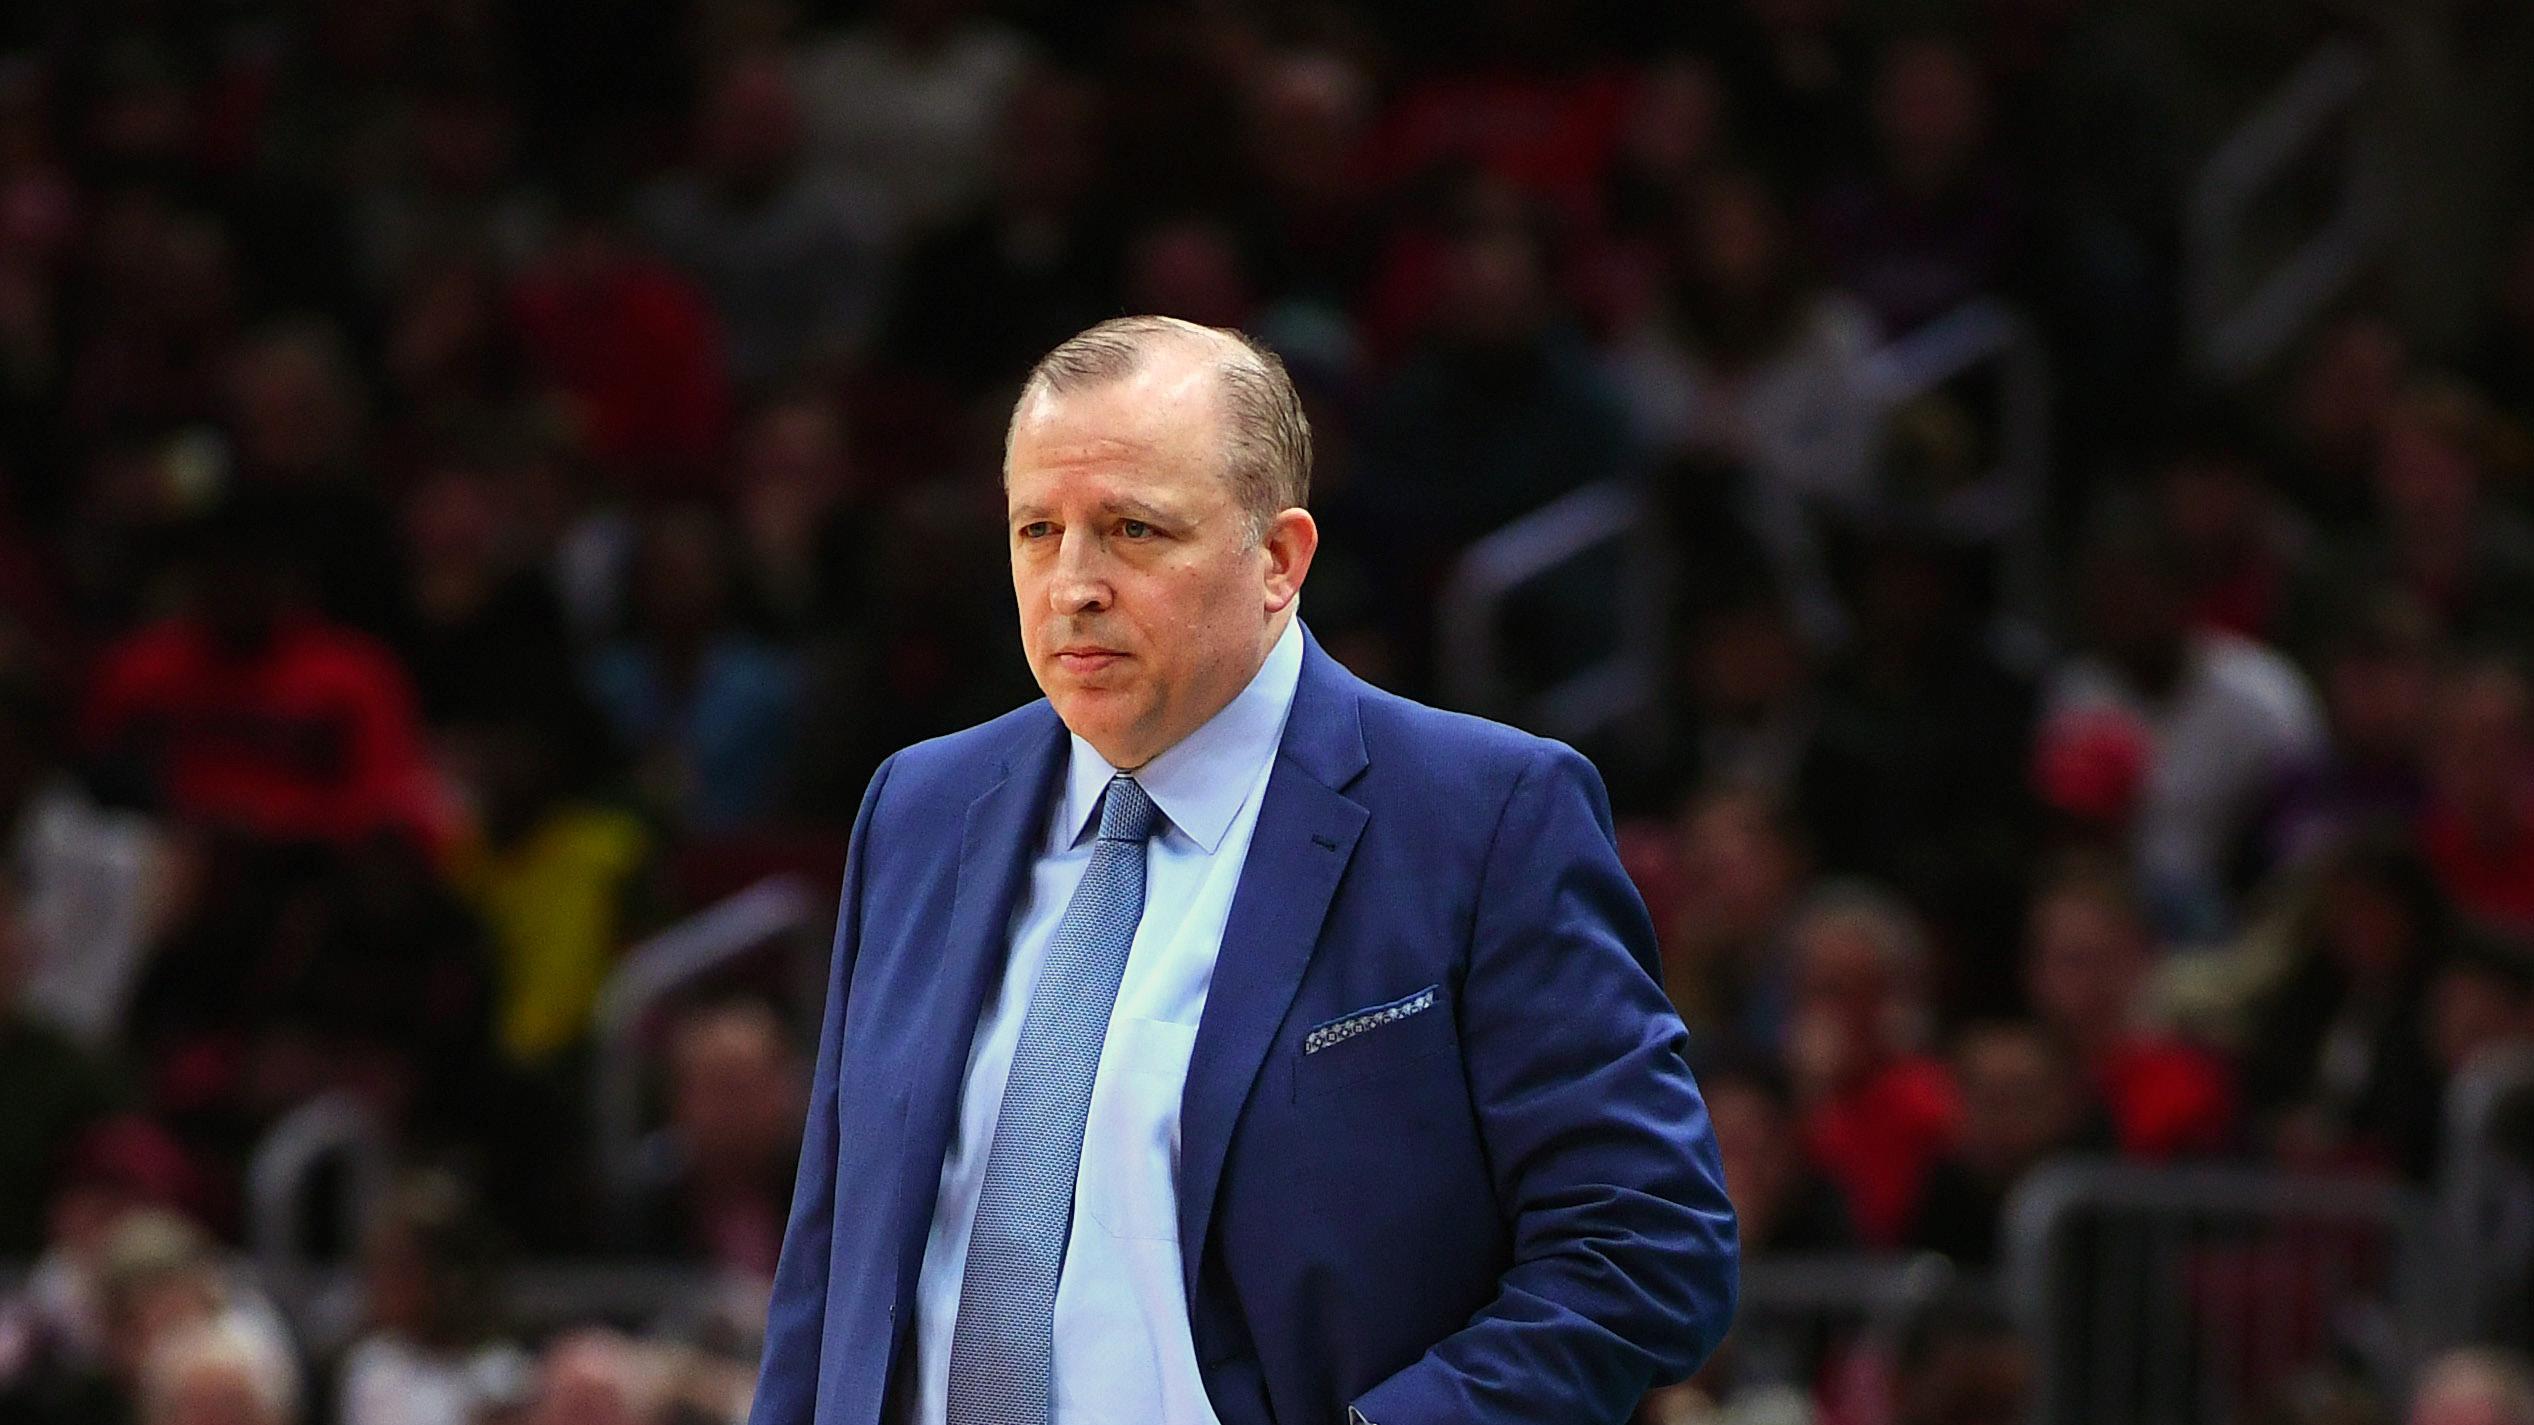 Tom Thibodeau looks on during game in blue suit / Mike Dinovo/USA TODAY